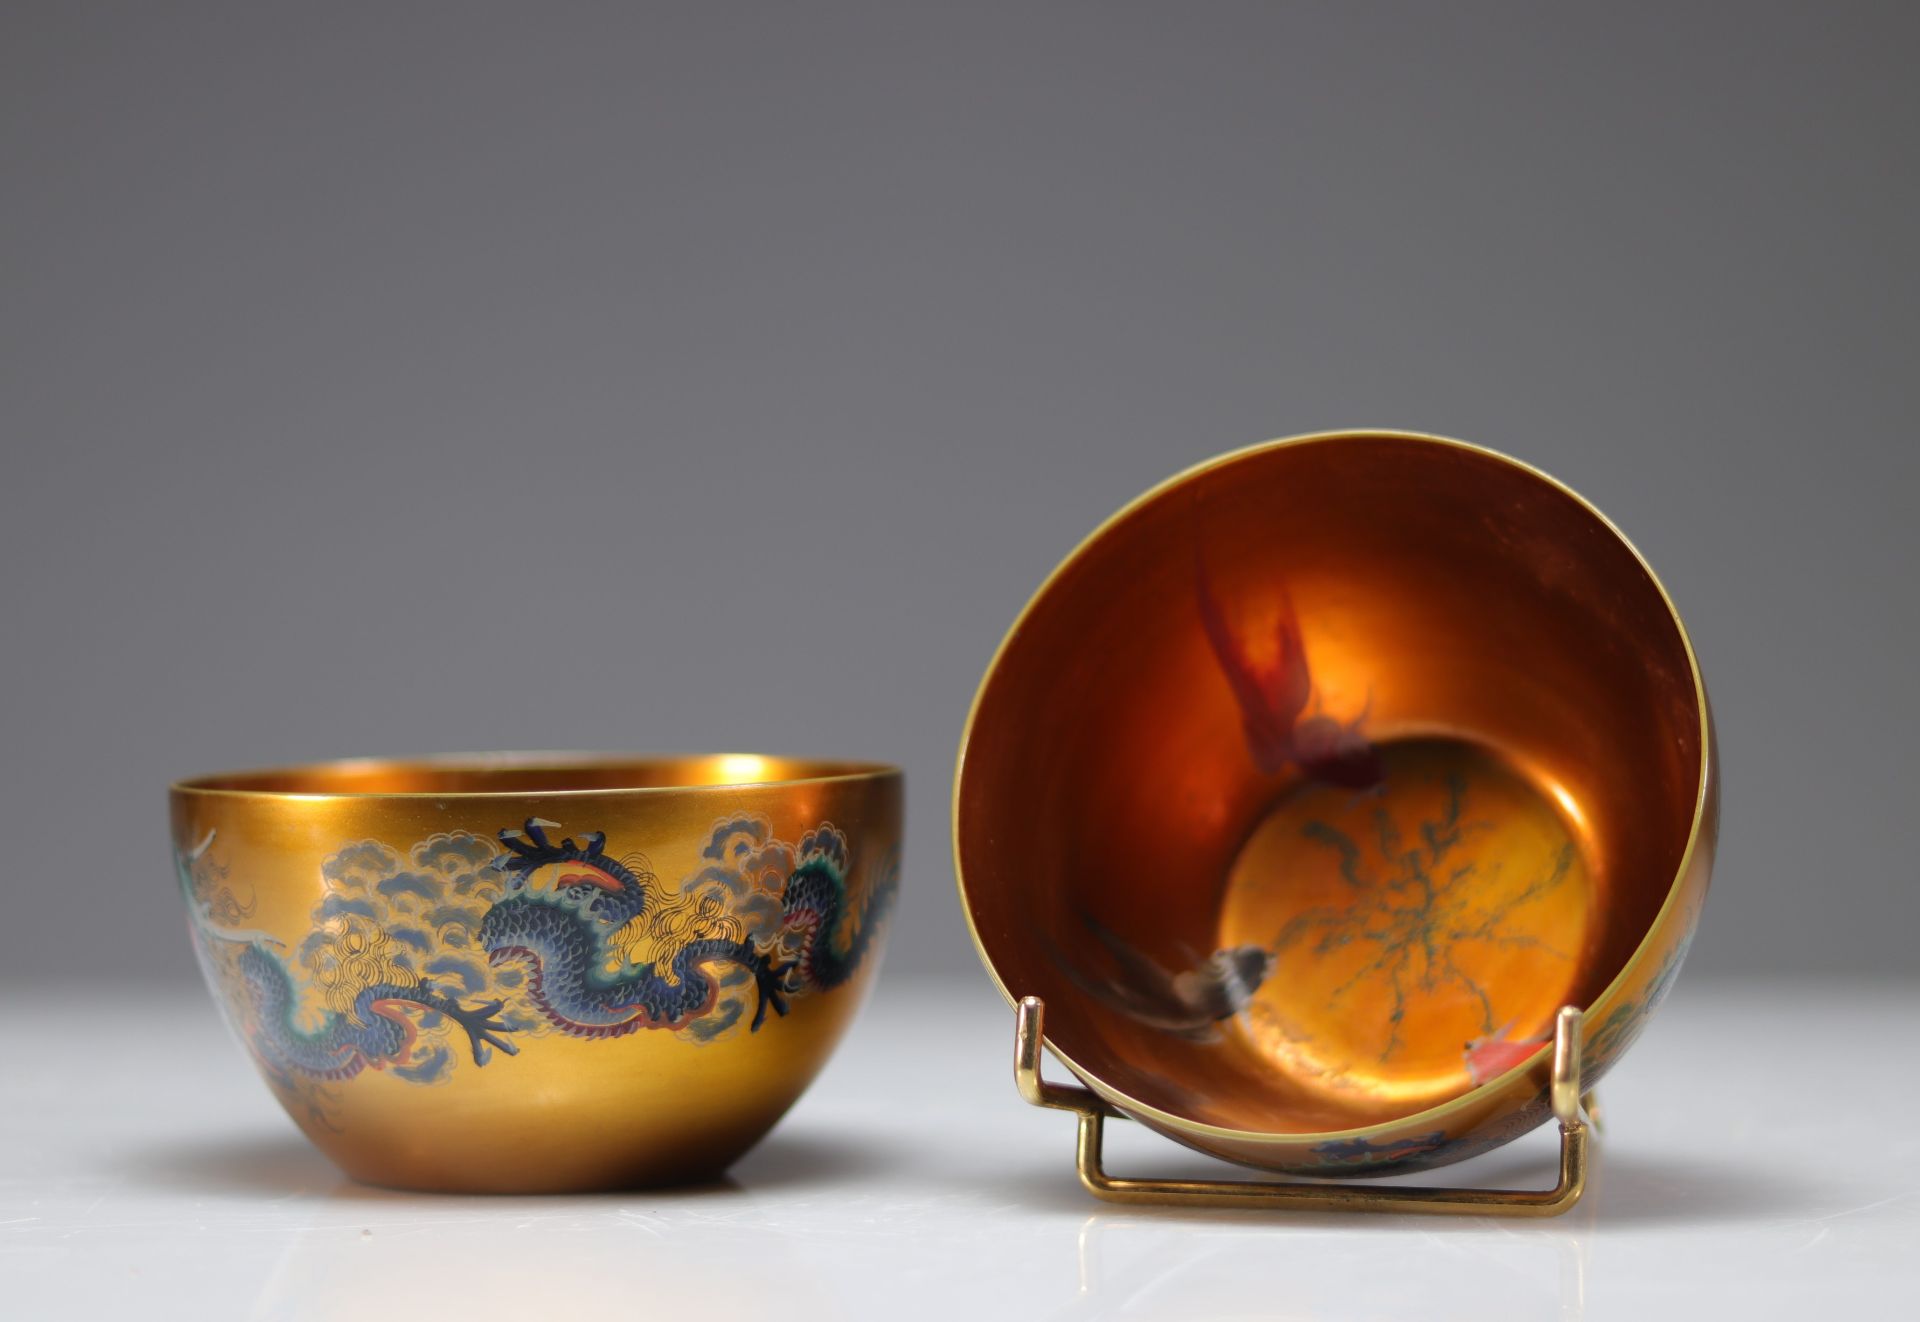 Lot of bowls (6) in Fuzhou lacquer decorated with dragons - Image 2 of 5